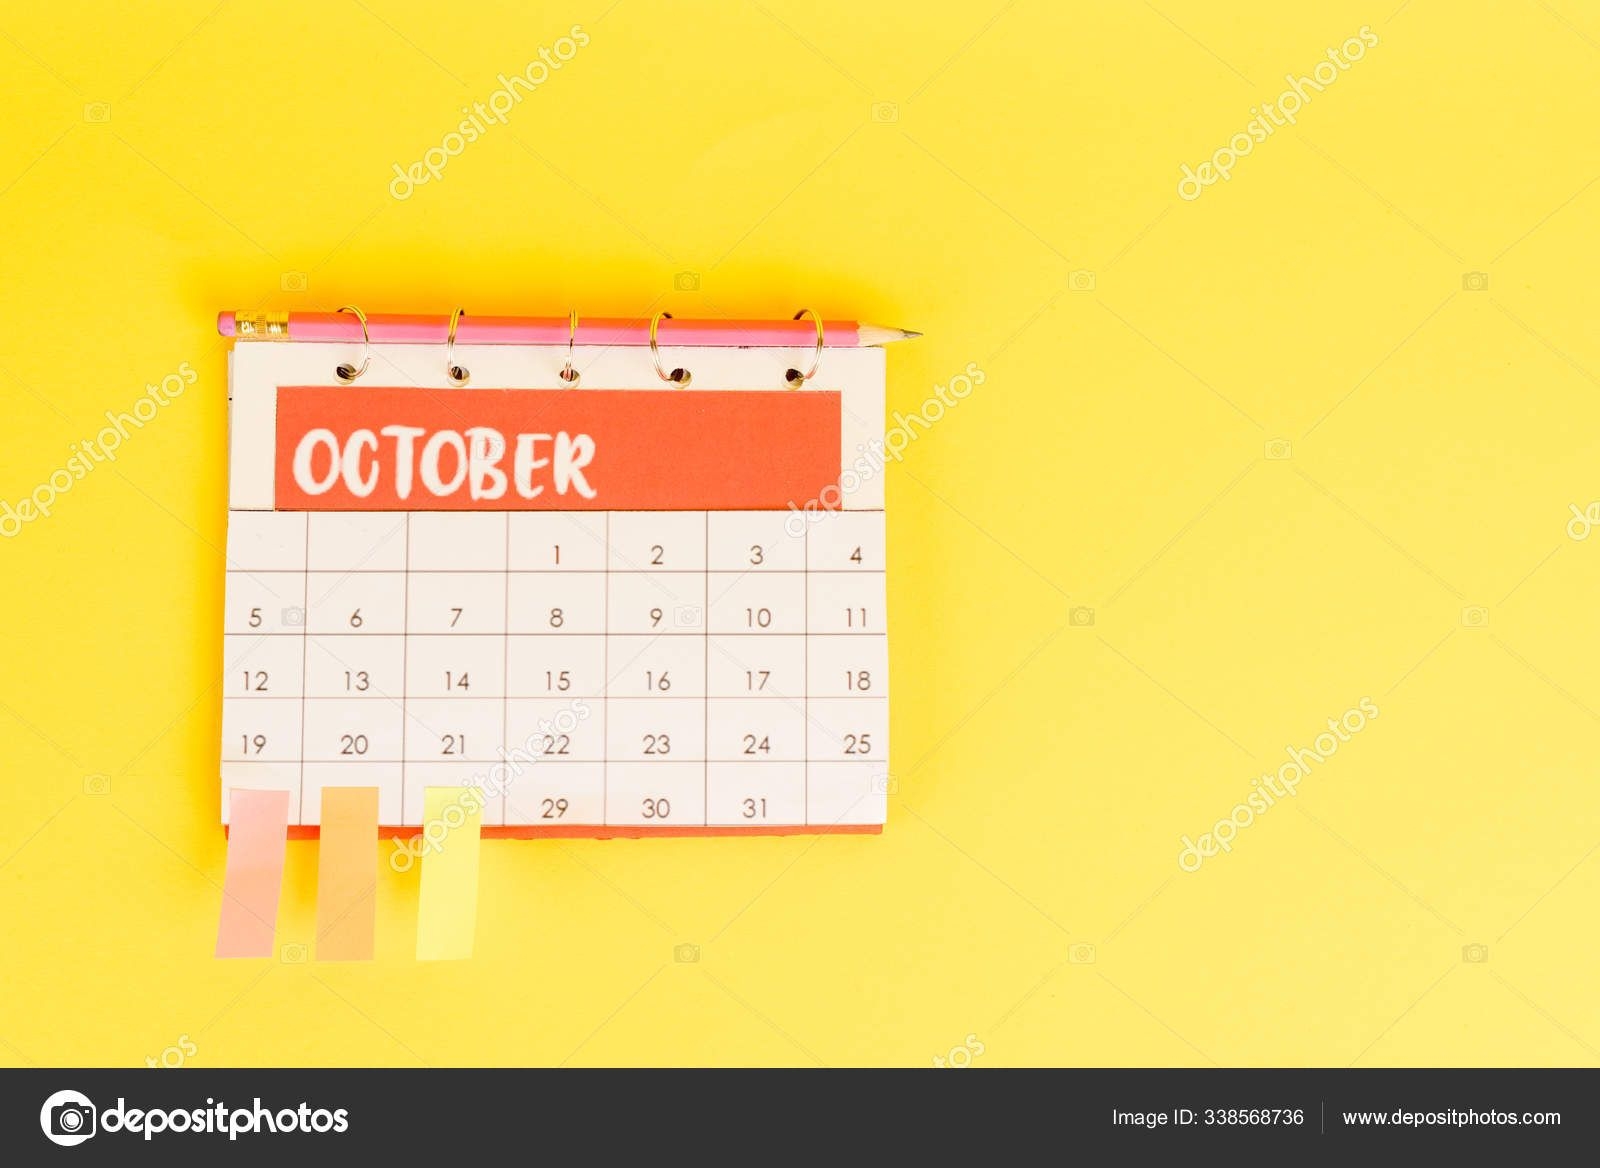 top view of pencil, calendar with october month and sticky notes on yellow background 338568736